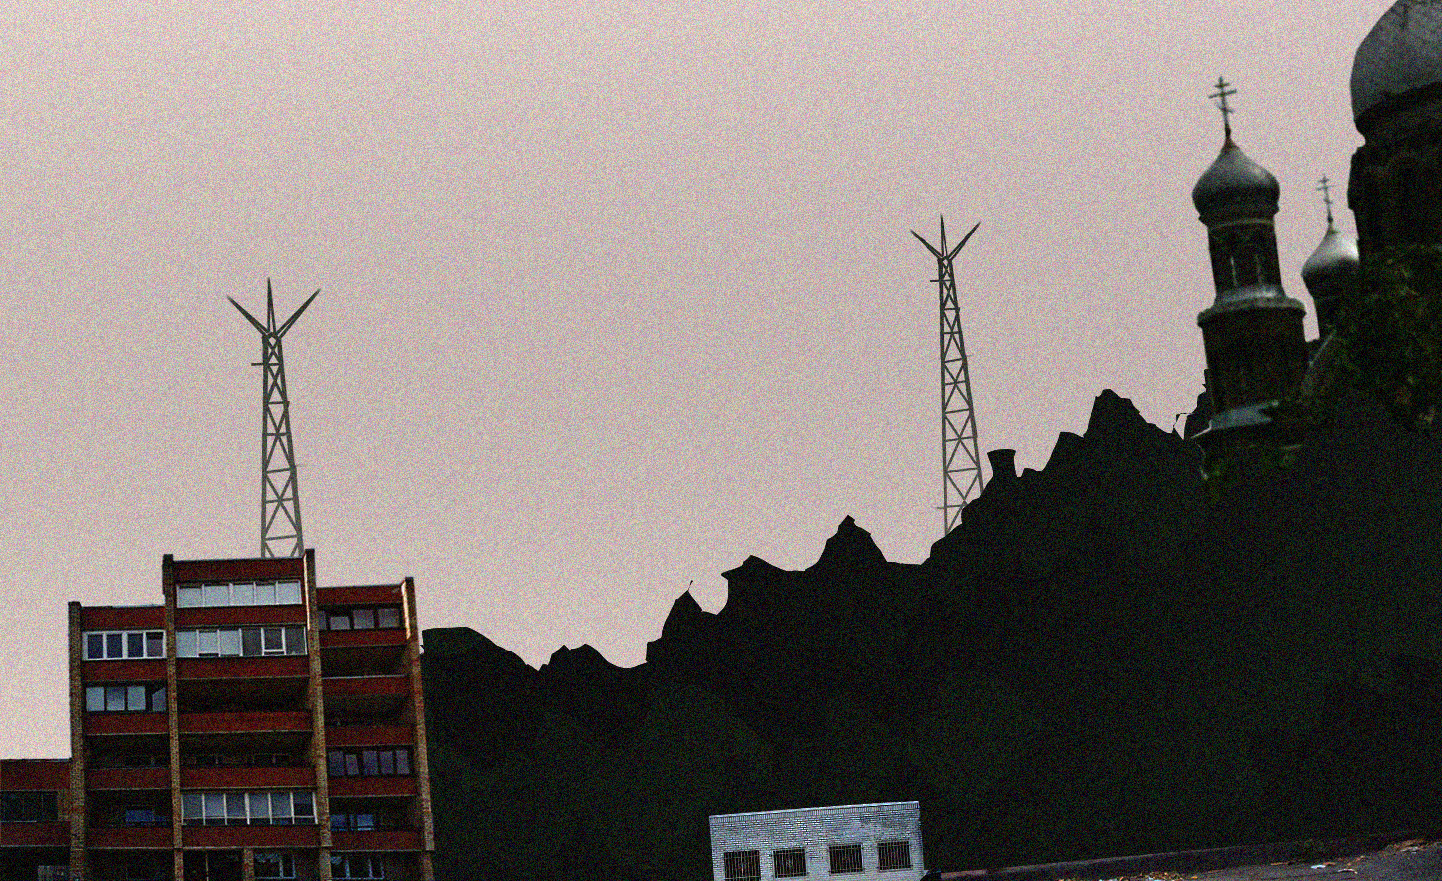 a series of radio towers and buildings with a setting sun